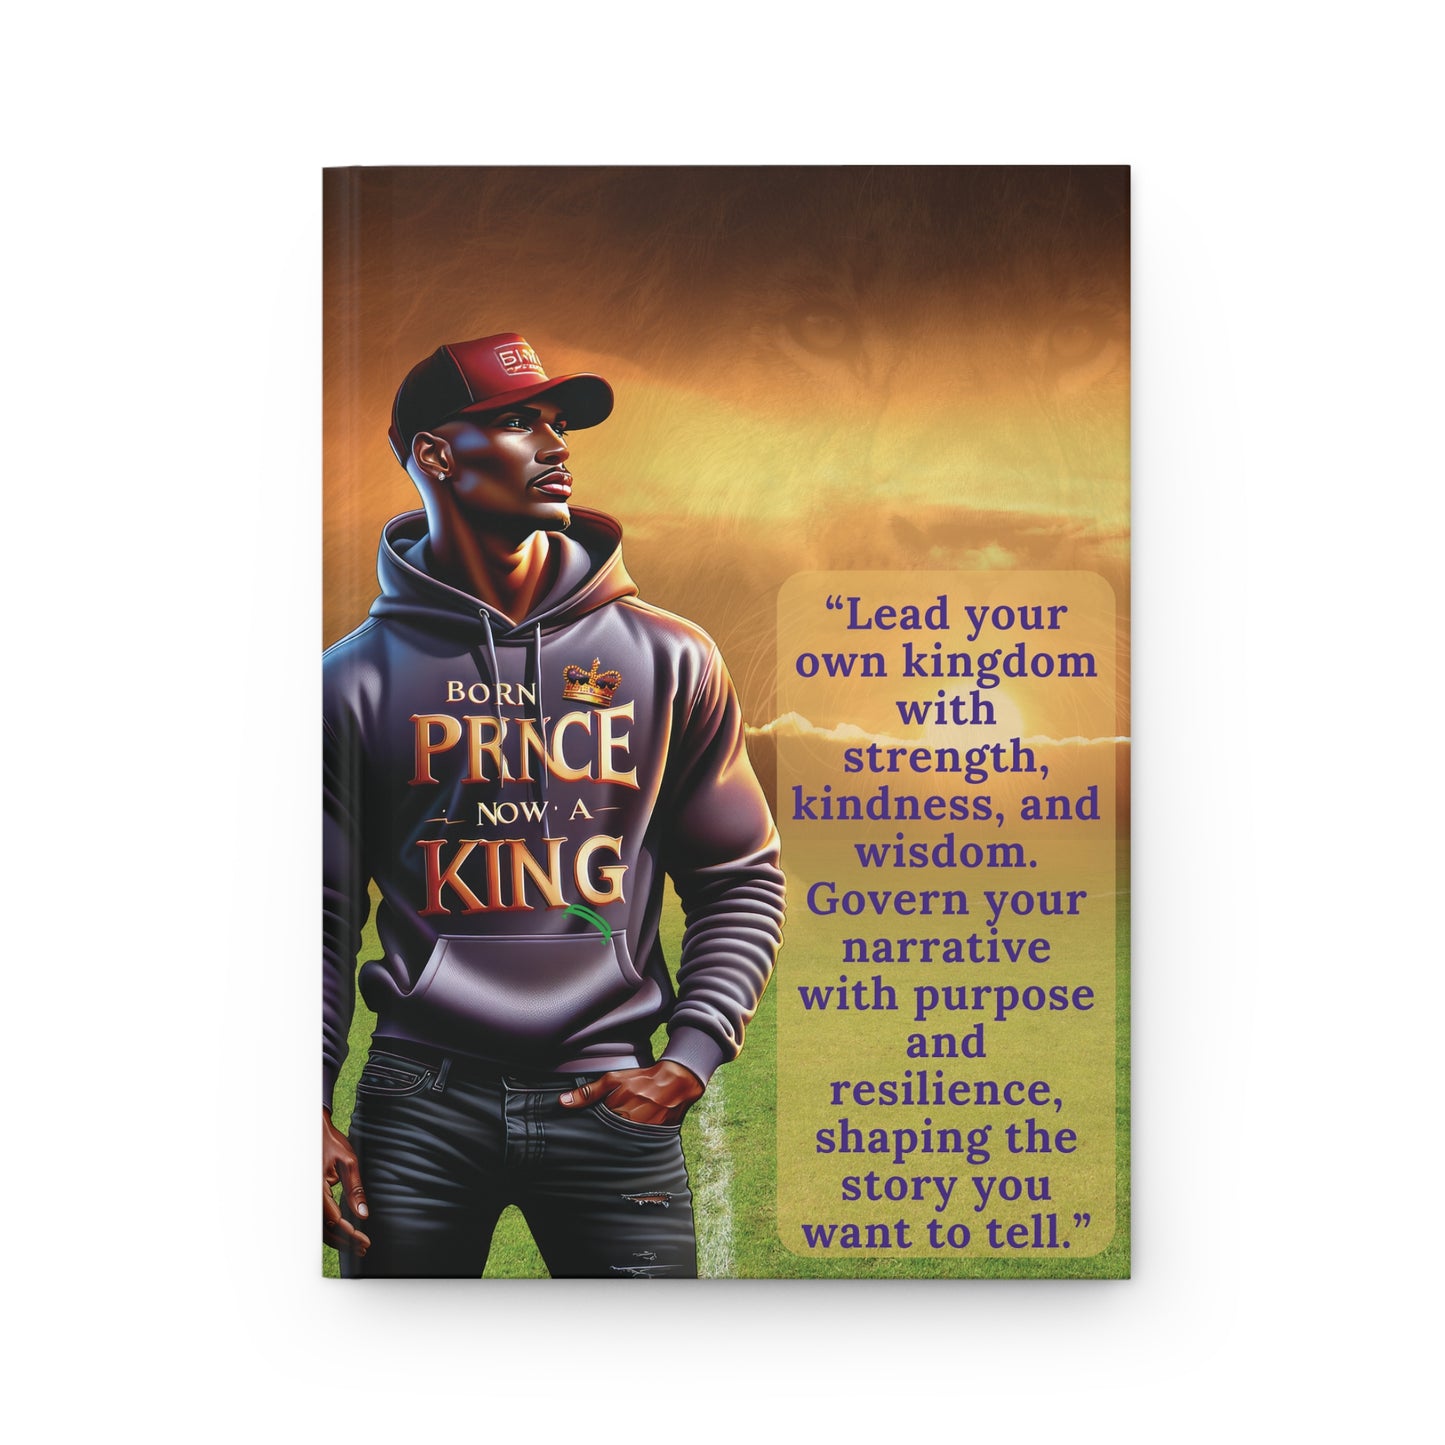 Born A Prince, Now A King Hardcover Journal